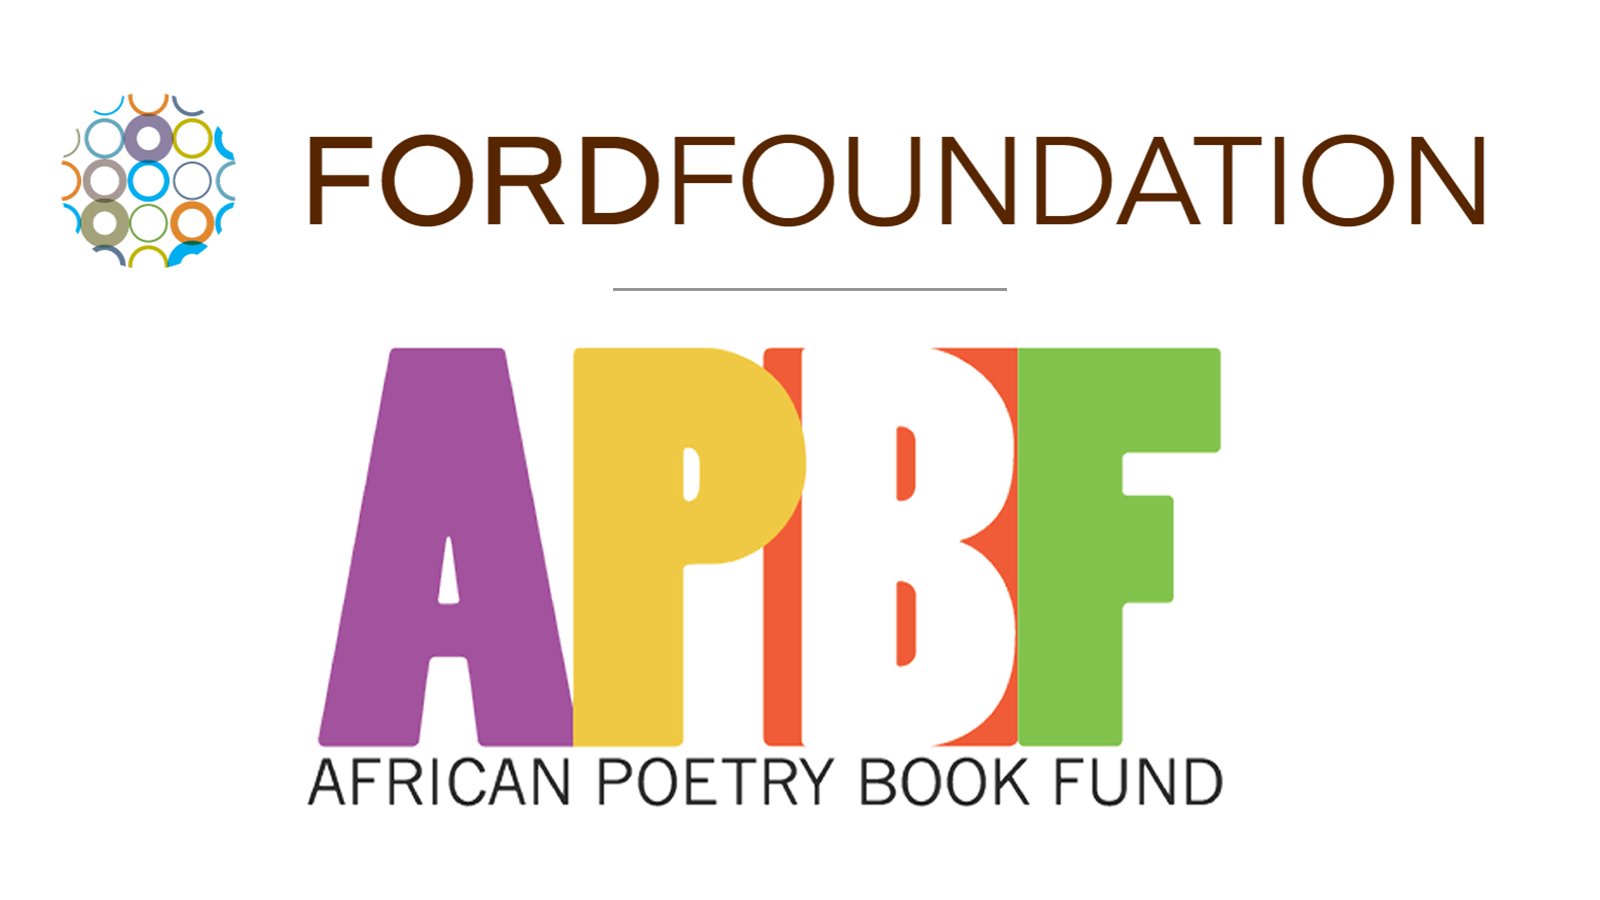 The Ford Foundation and African Poetry Book Fund logos; links to news story